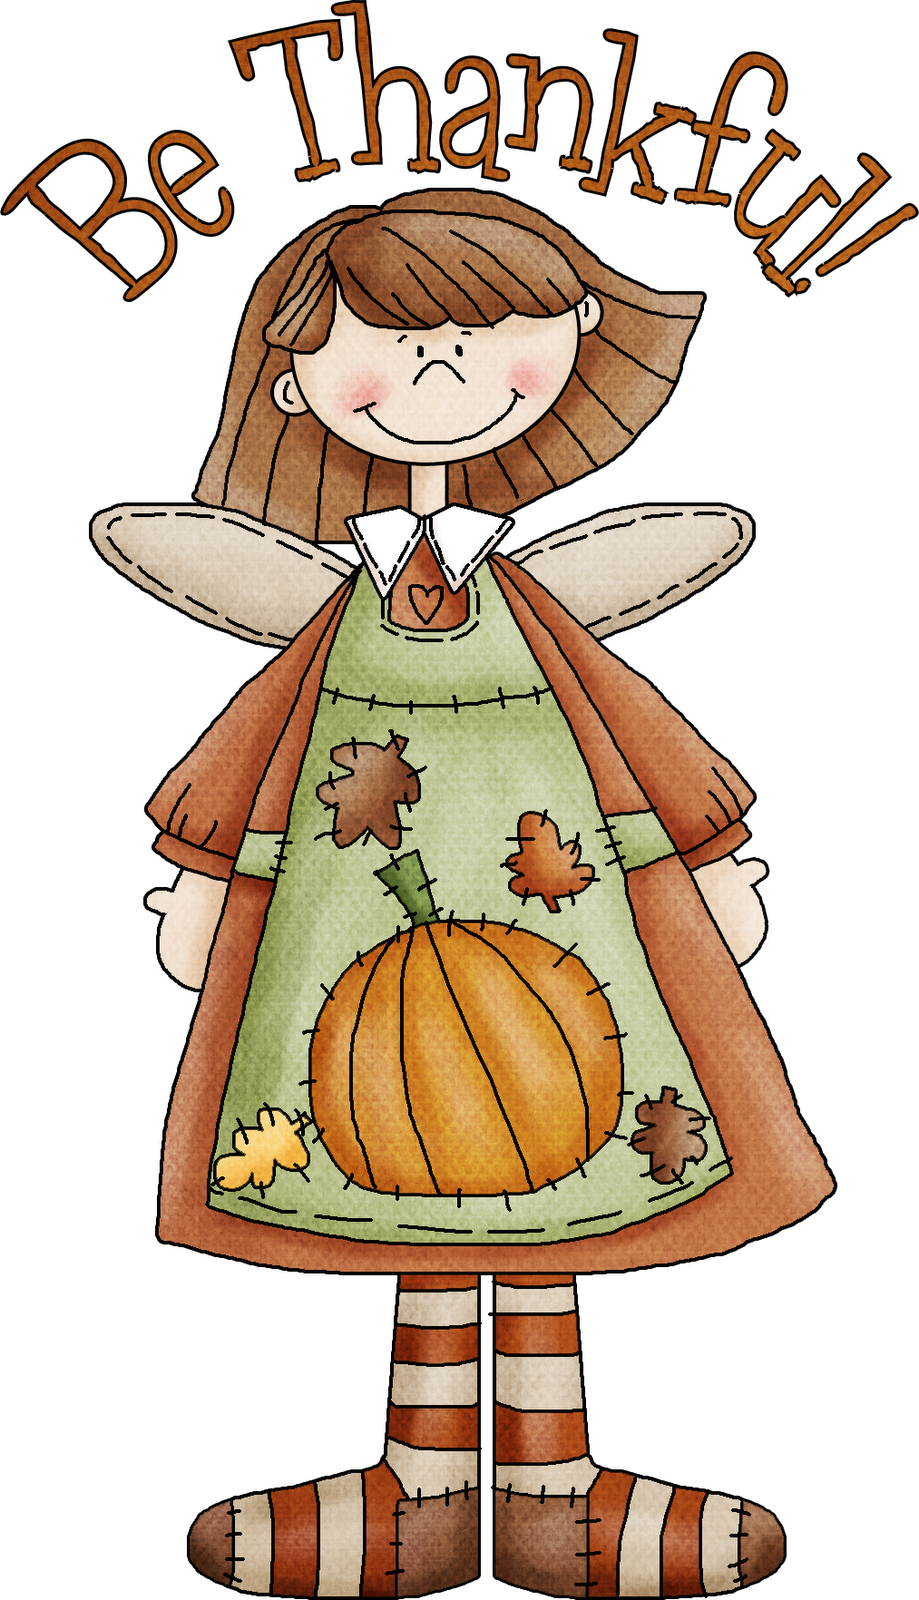 November Clip Art Pictures and Thanksgiving Images | Printable and ...